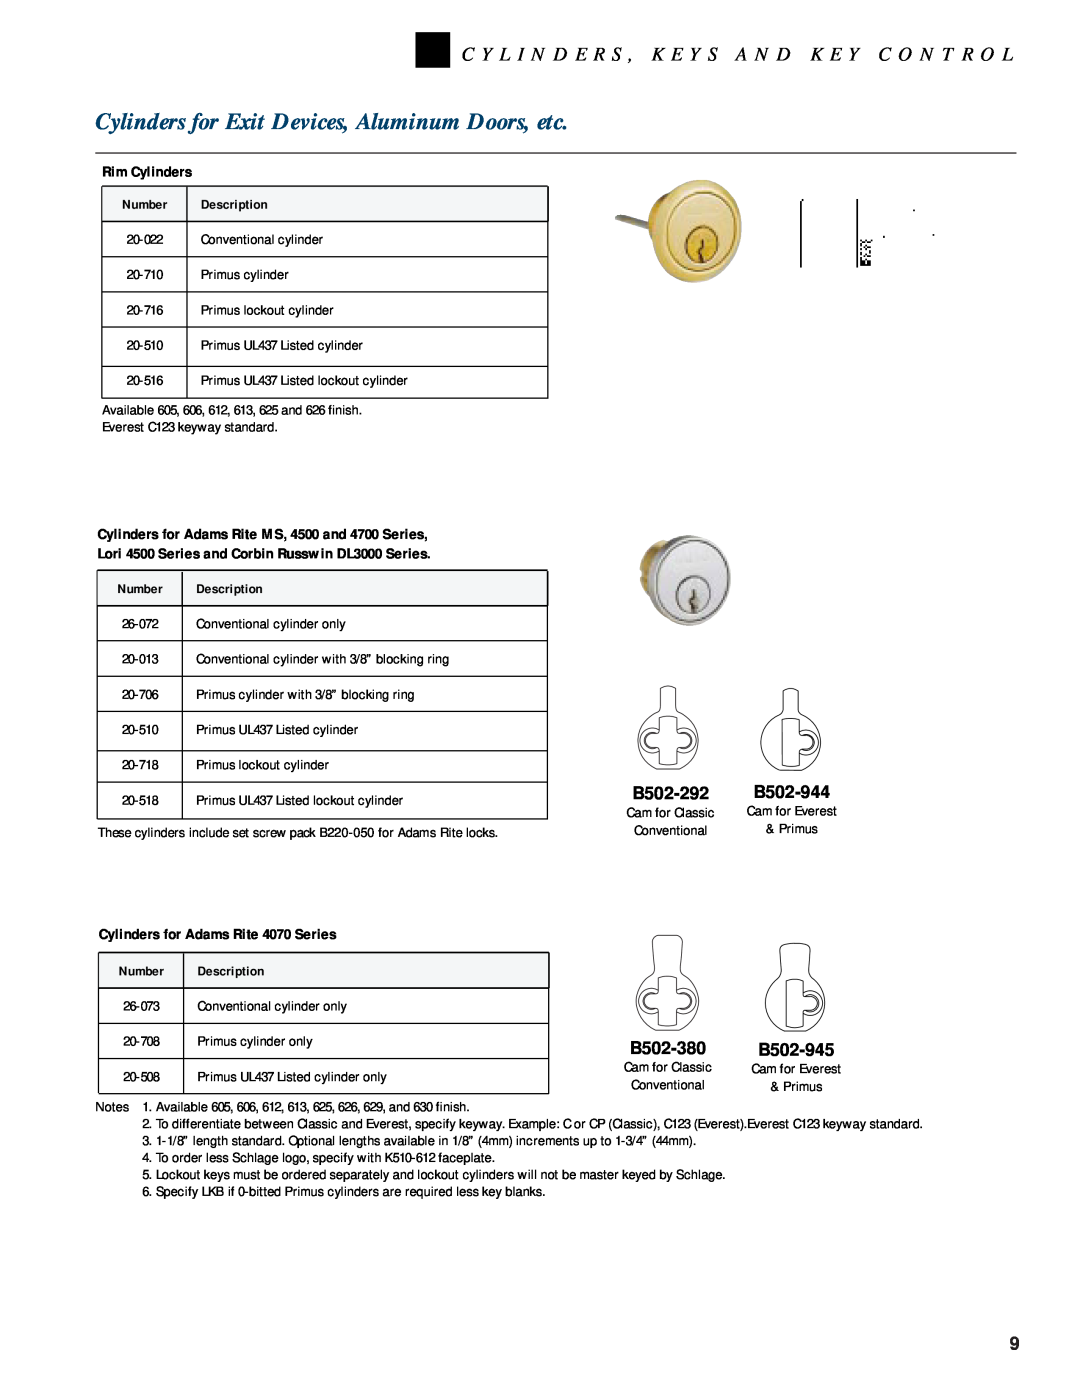 Schlage KEYS AND KEY CONTROL manual Cylinders for Exit Devices, Aluminum Doors, etc, B502-292, B502-944, B502-380, B502-945 